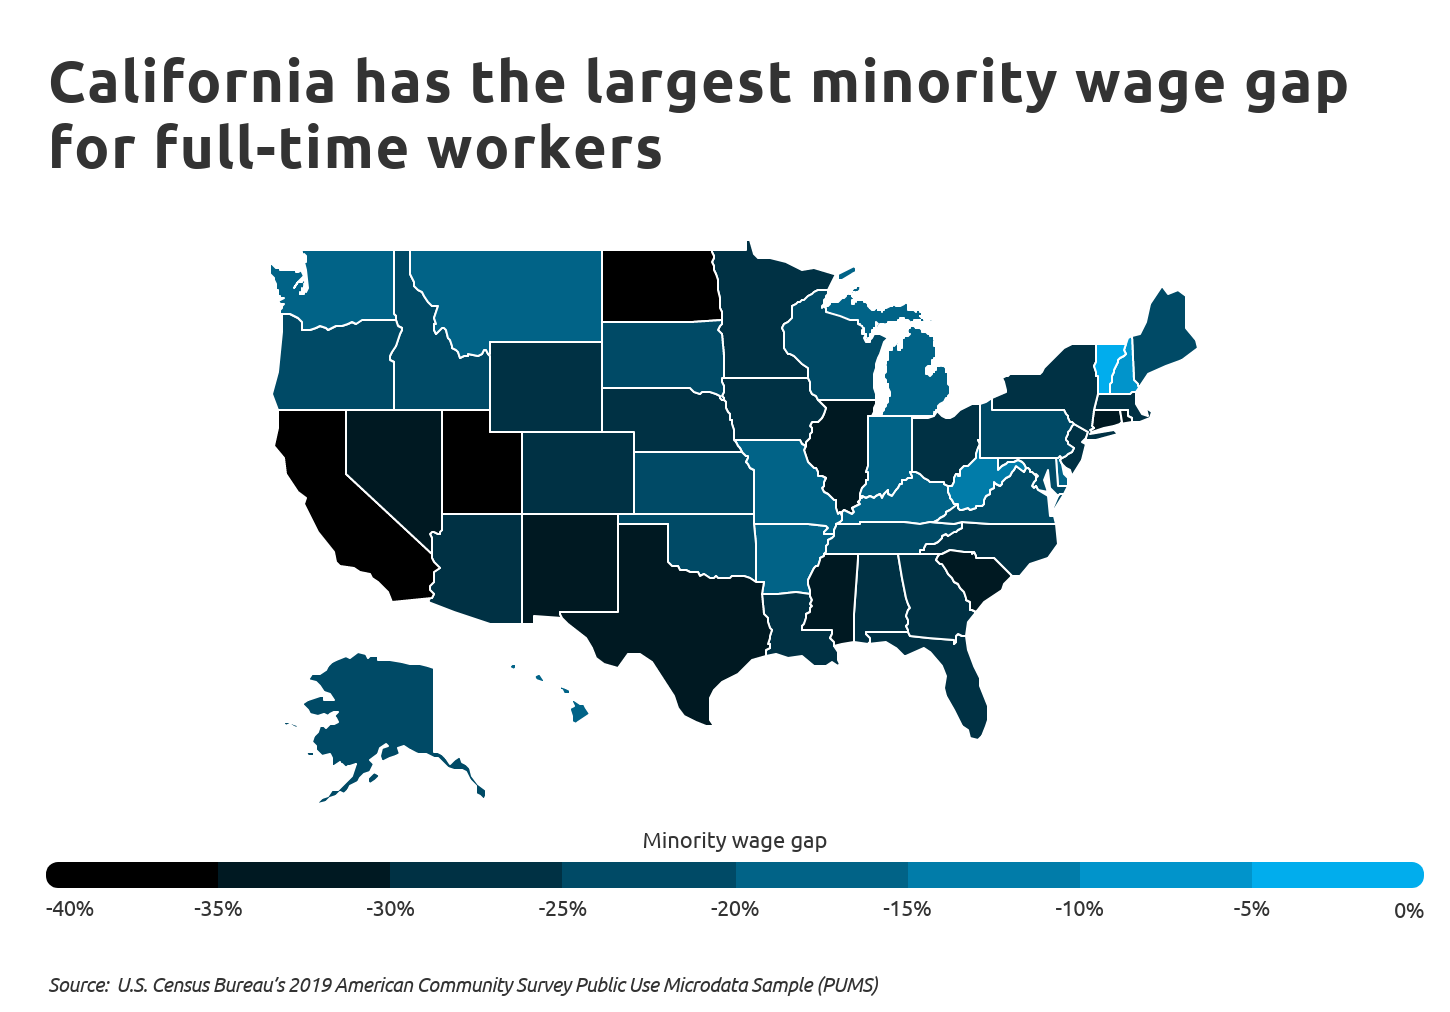 California has the largest minority wage gap for full-time workers